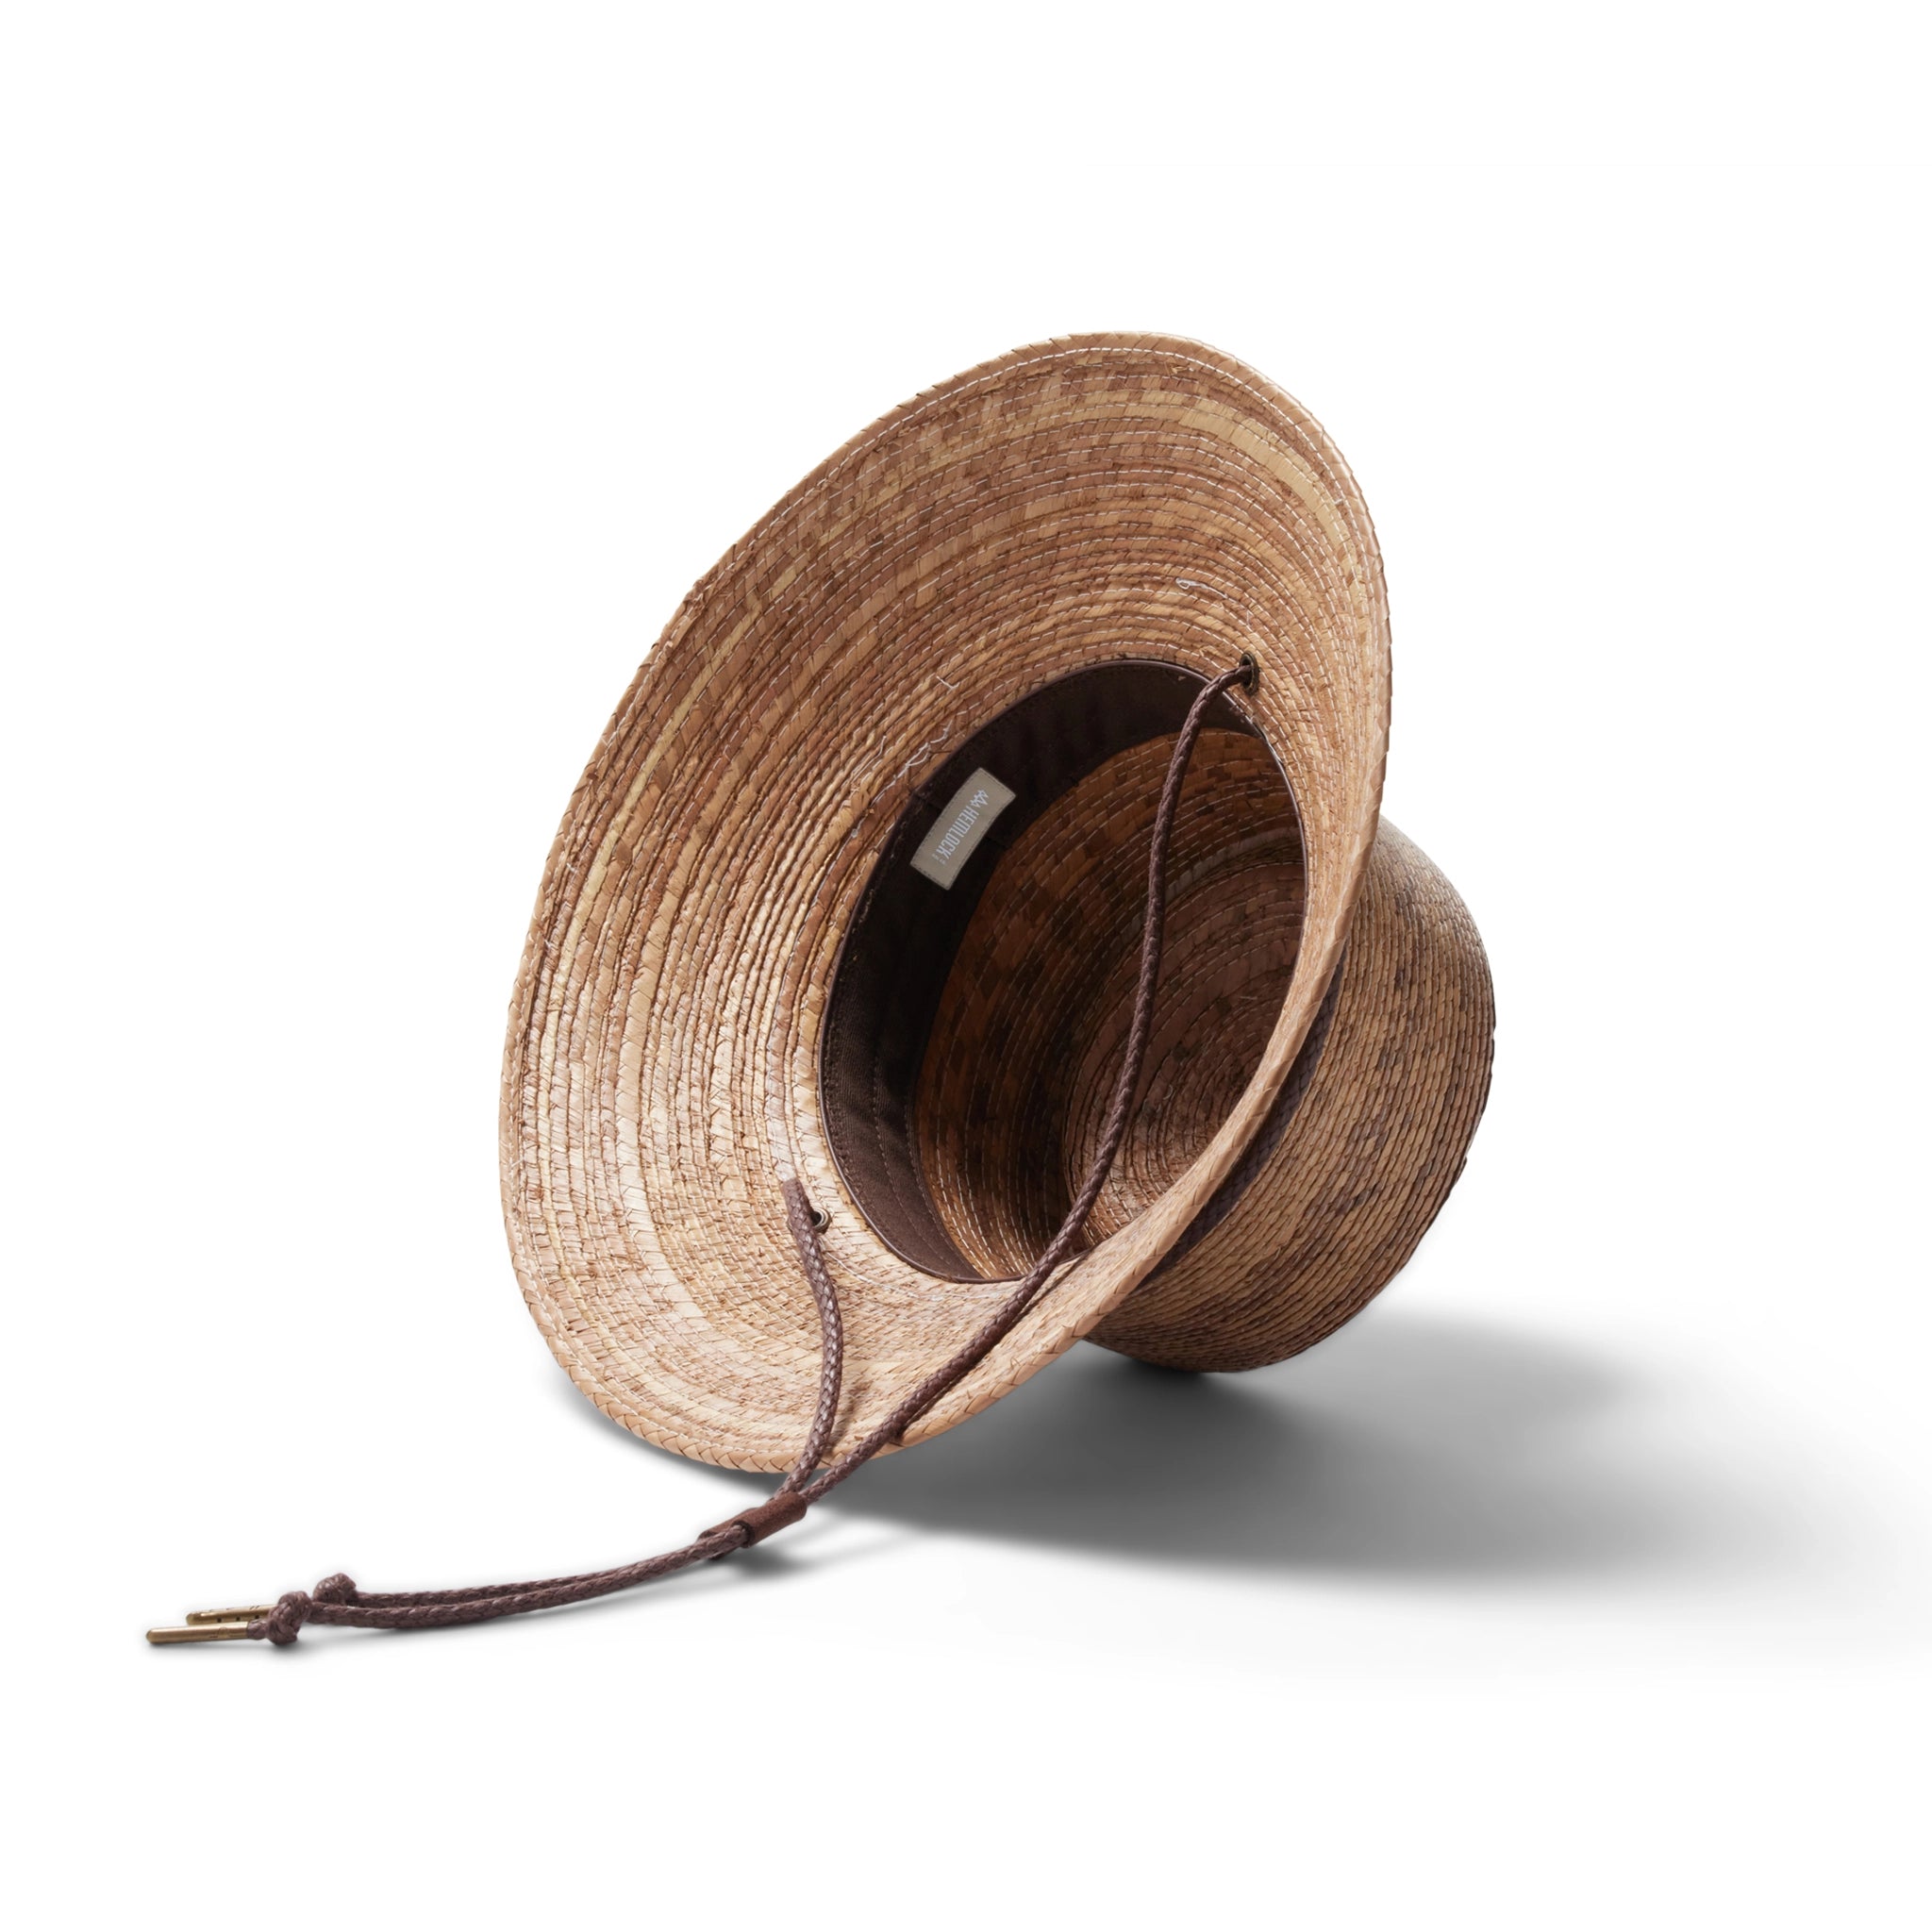 A woven bucket hat with a flat top, a slightly angled brim made of a darker brown straw and also features a brown drawstring.